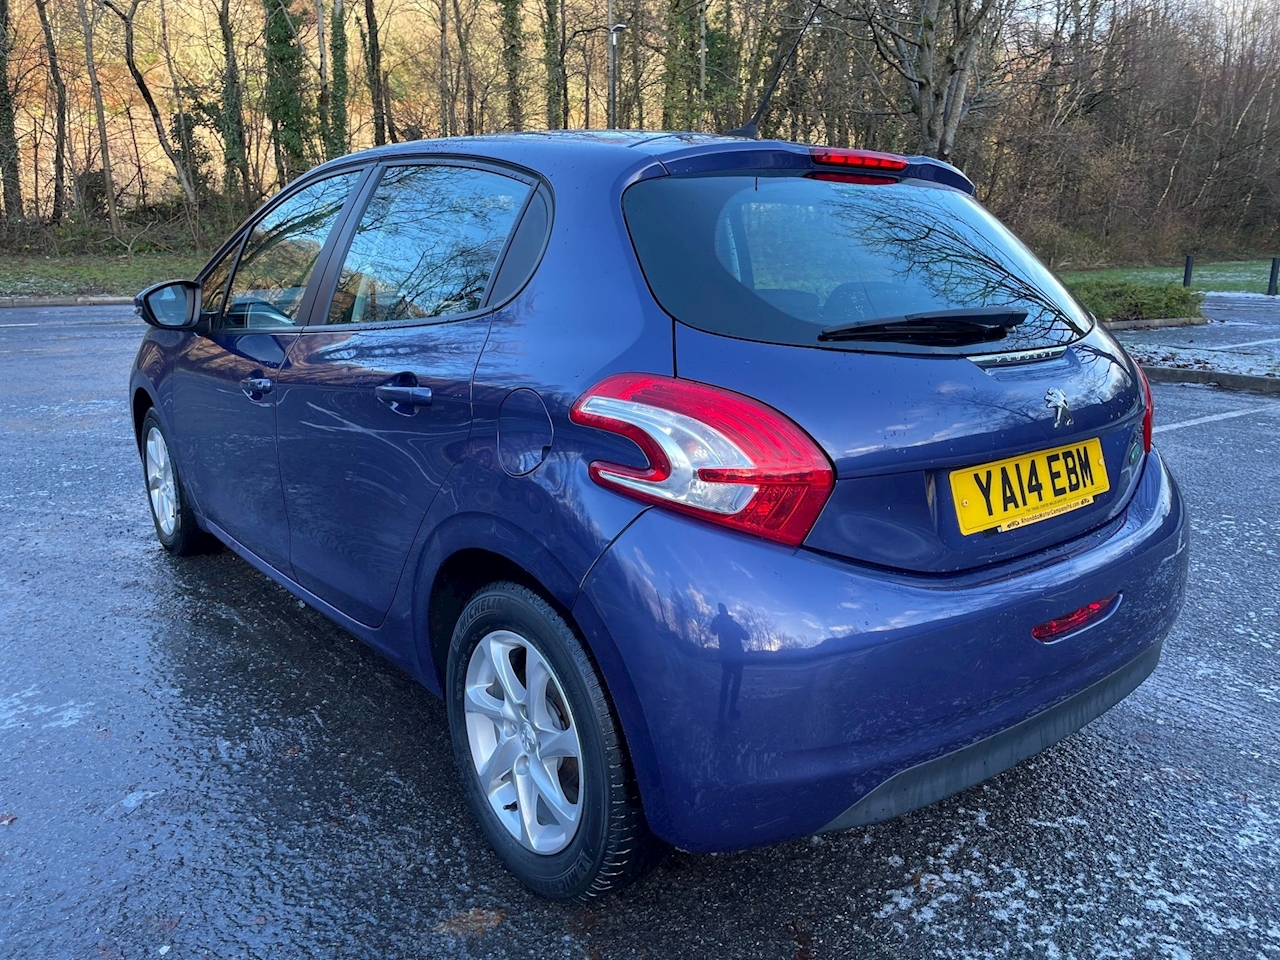 1.4 HDi Active Hatchback 5dr Diesel Manual Euro 5 (70 ps)